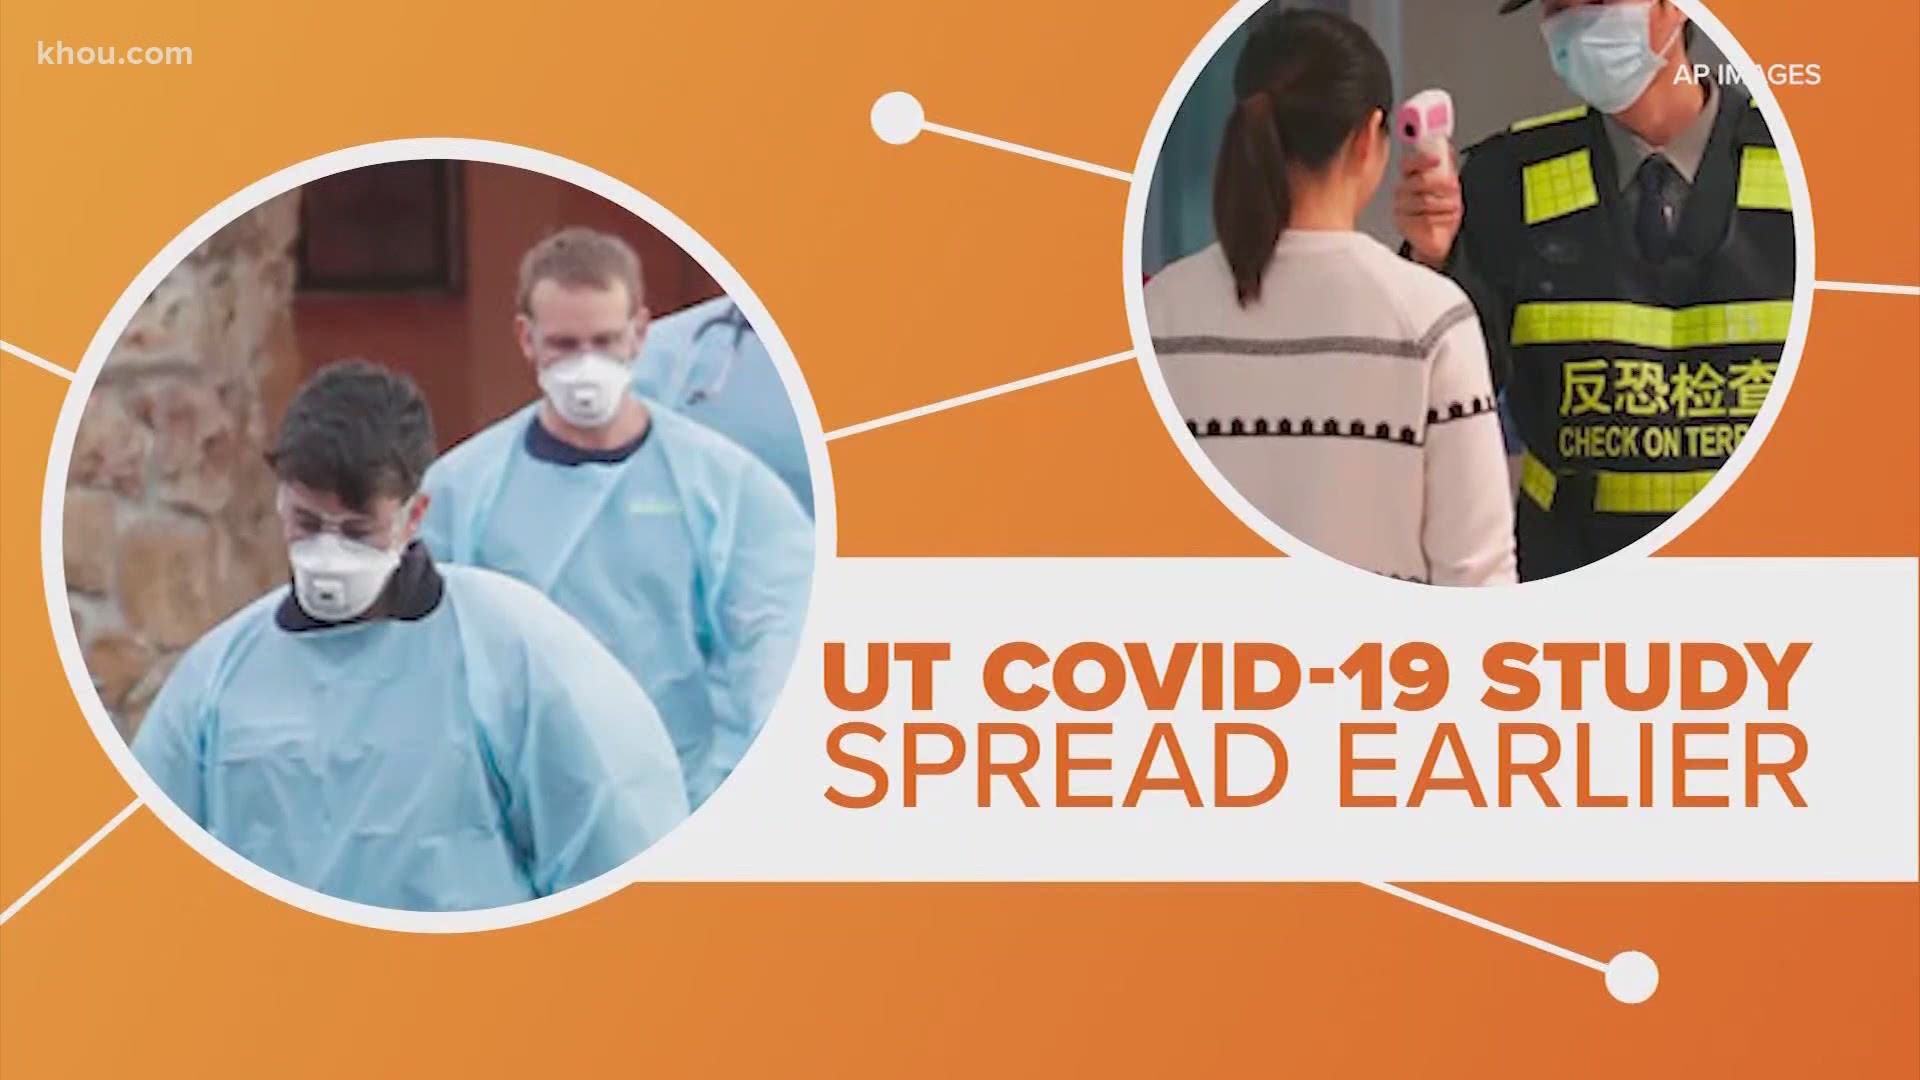 New research out of the University of Texas shows that COVID-19 was spreading farther and faster than anyone knew at the start of this pandemic.